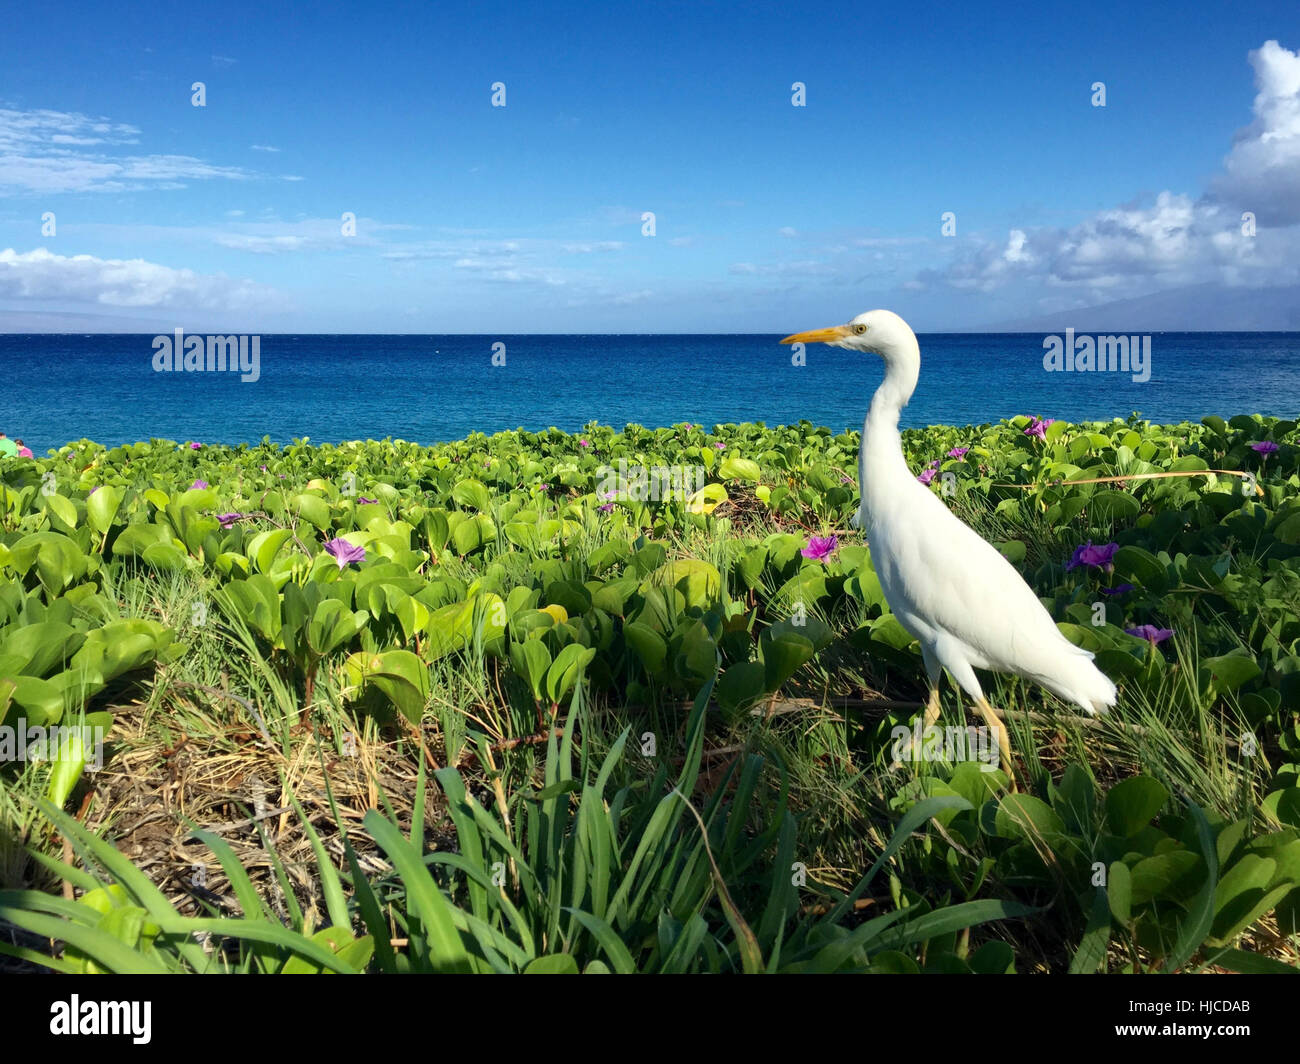 A Cattle Egret stands in a group of green plants and purple flowers in front of a tropical ocean. Stock Photo